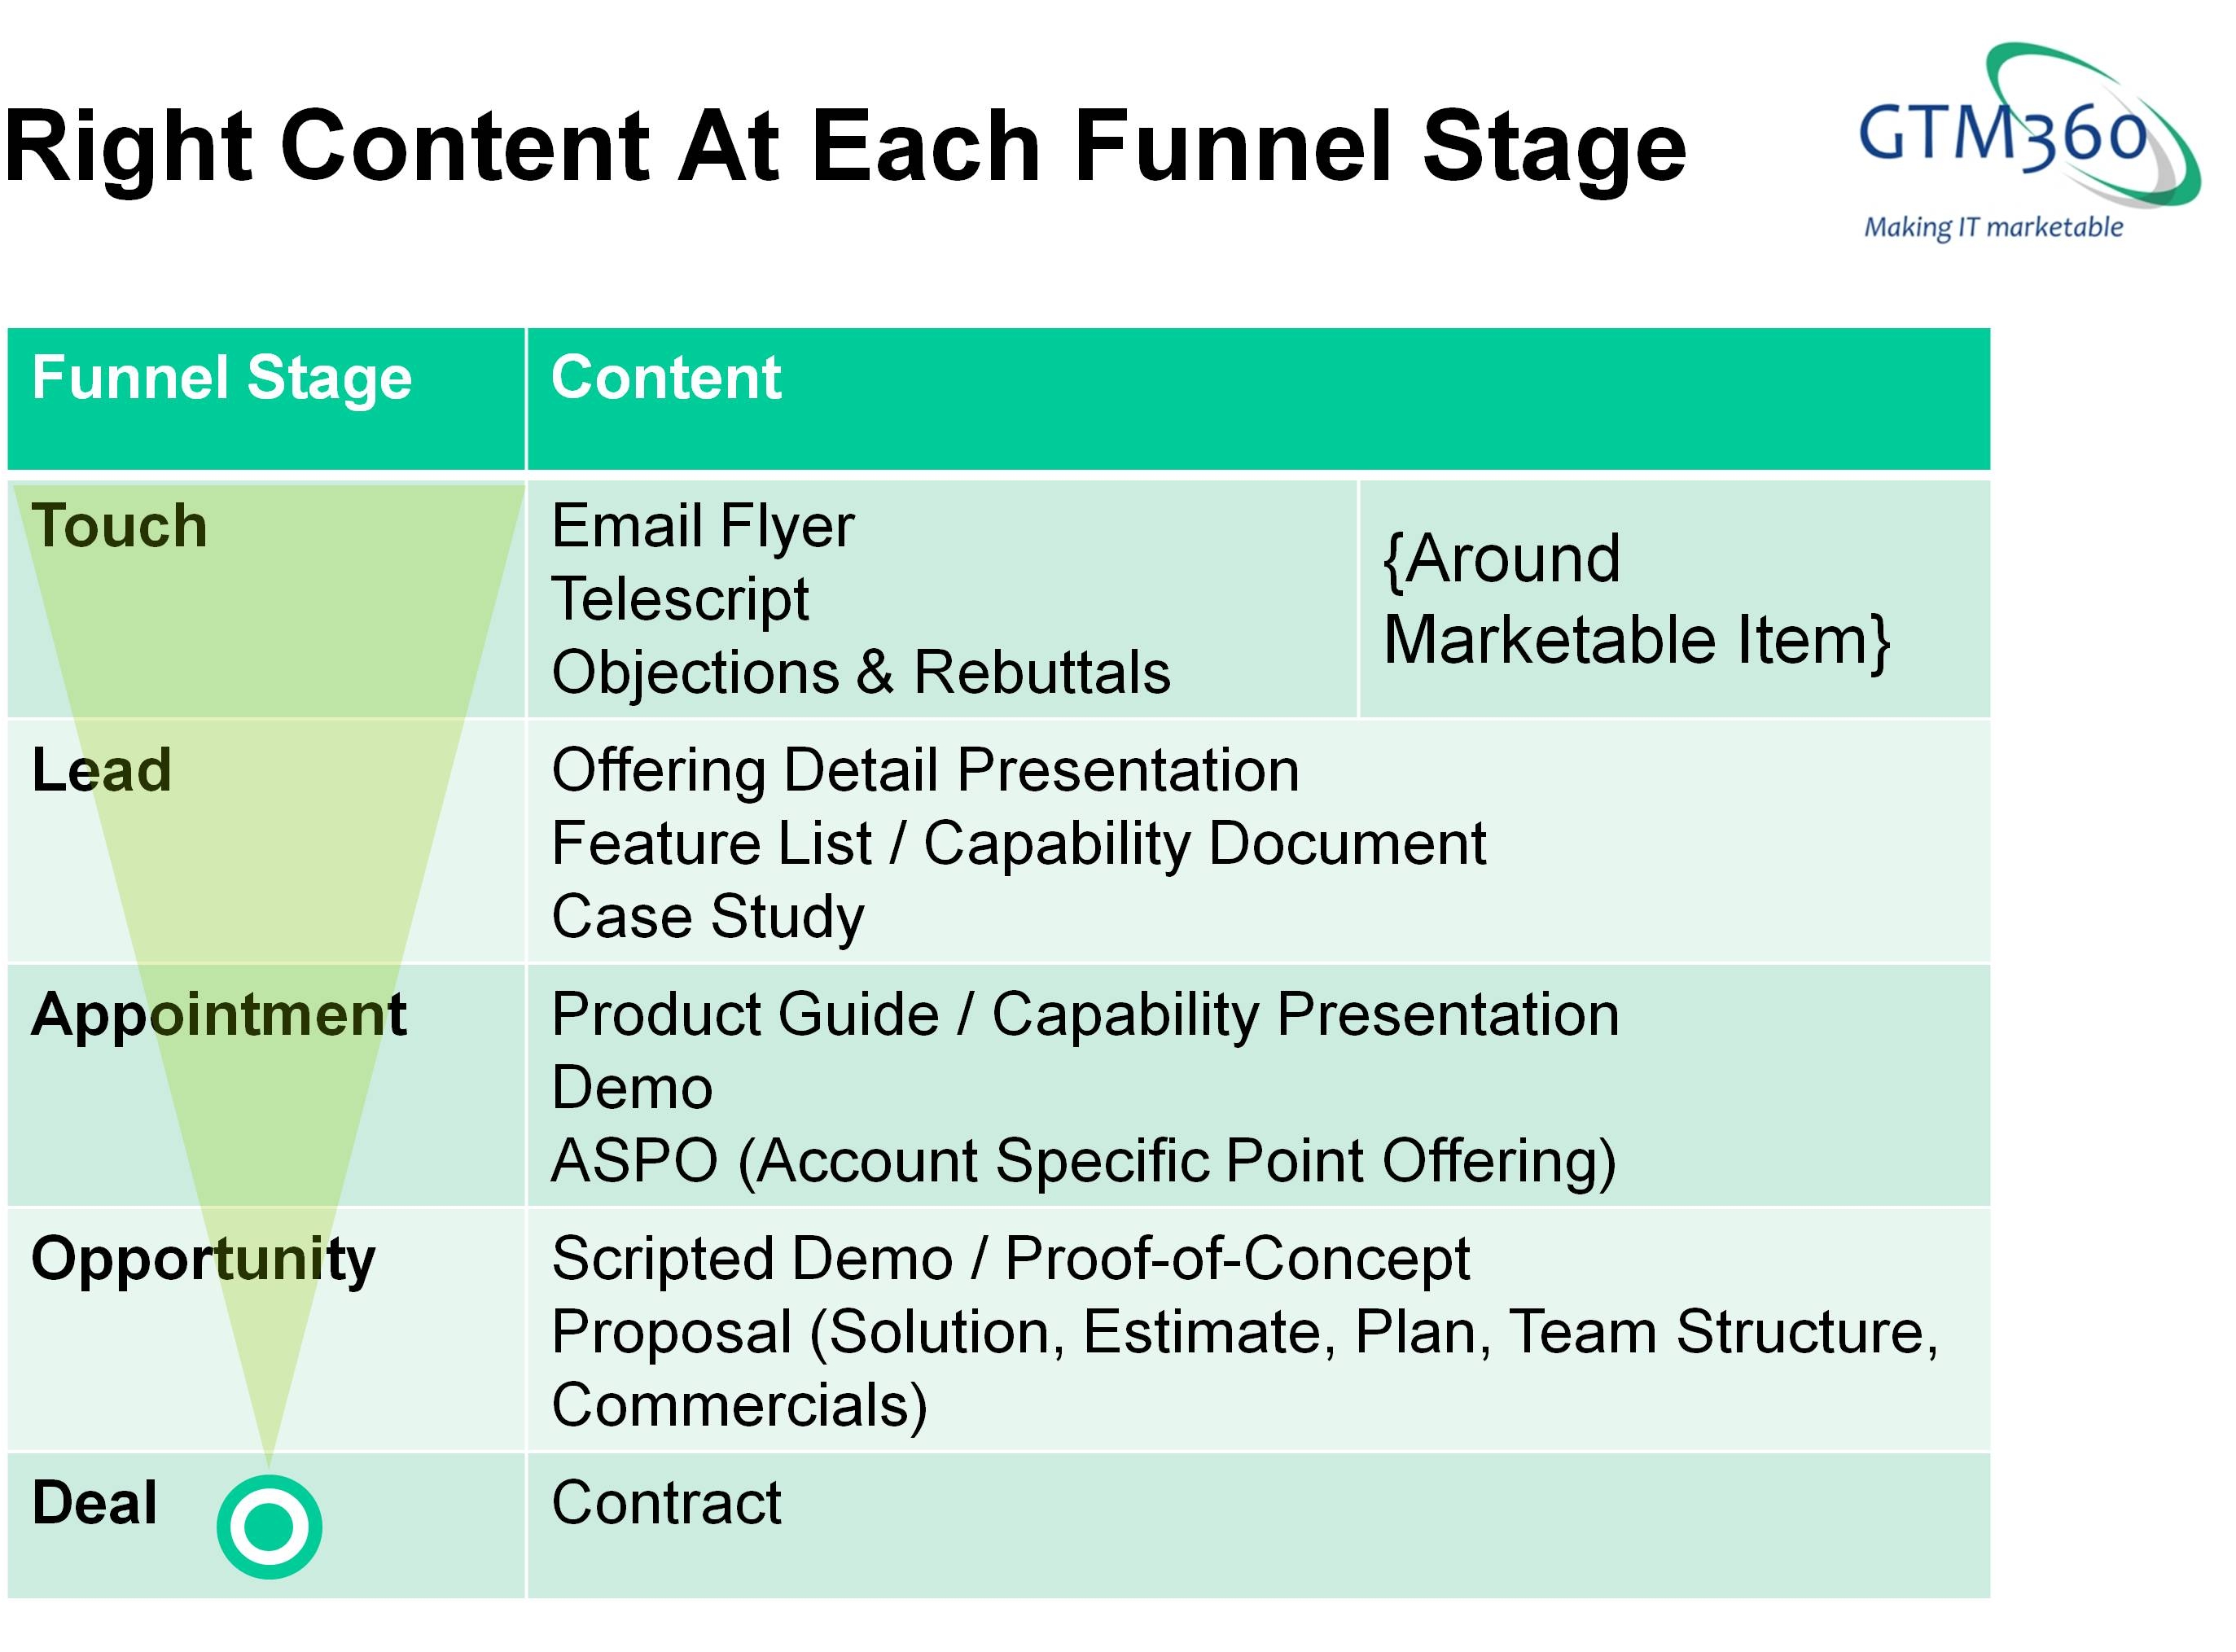 Right Content At Each Funnel Stage